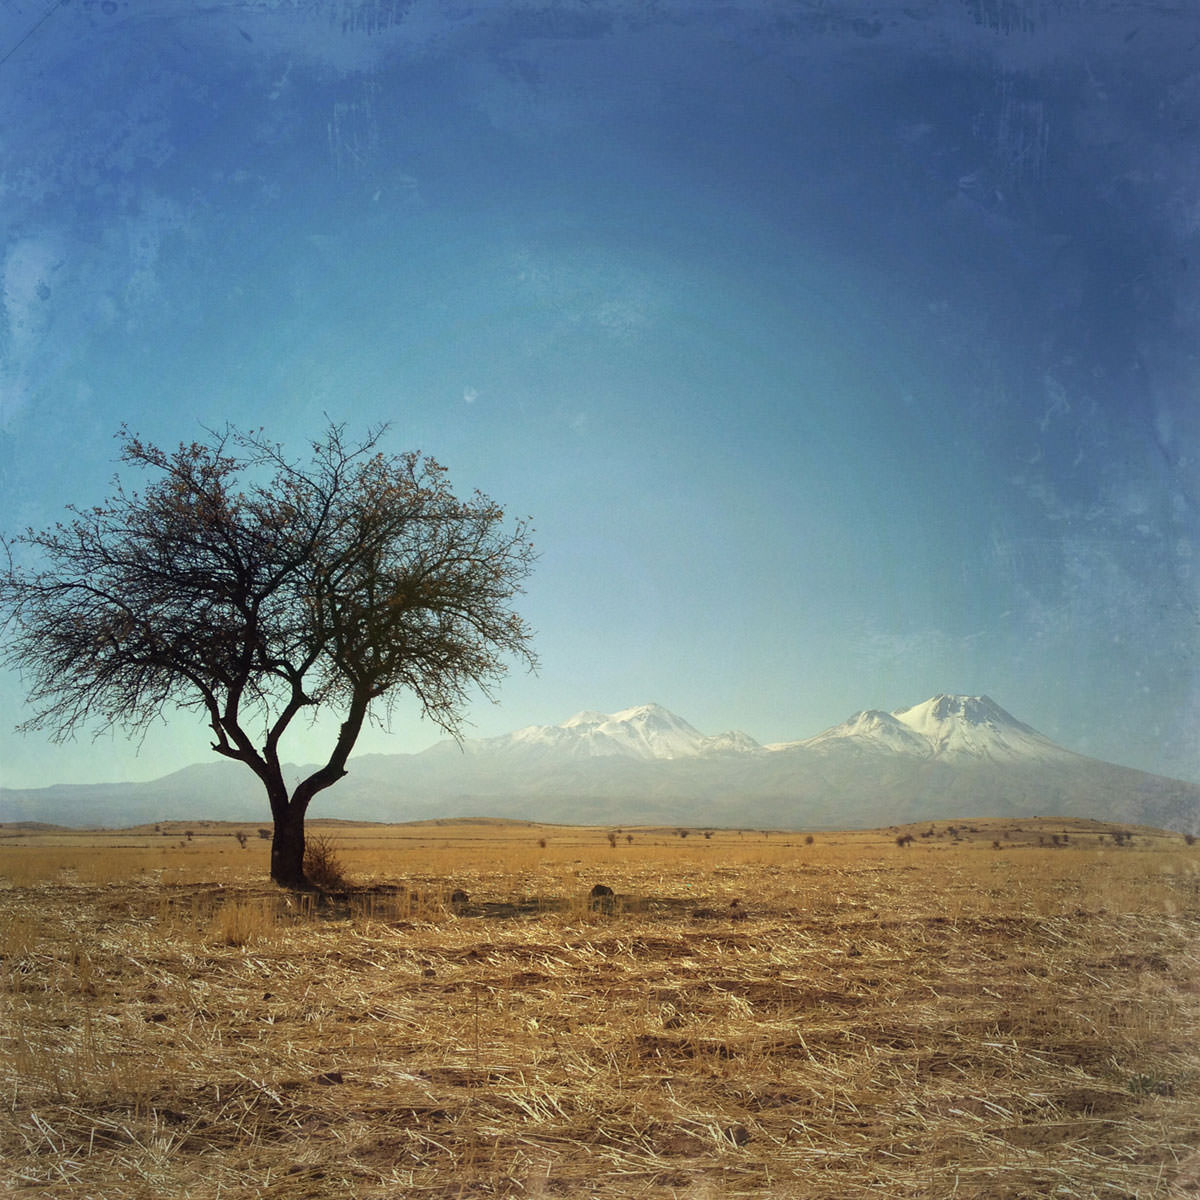 Blogpost: 10 Tips For Taking Stunning Landscape Photos With Your iPhone - Emil Pakarklis